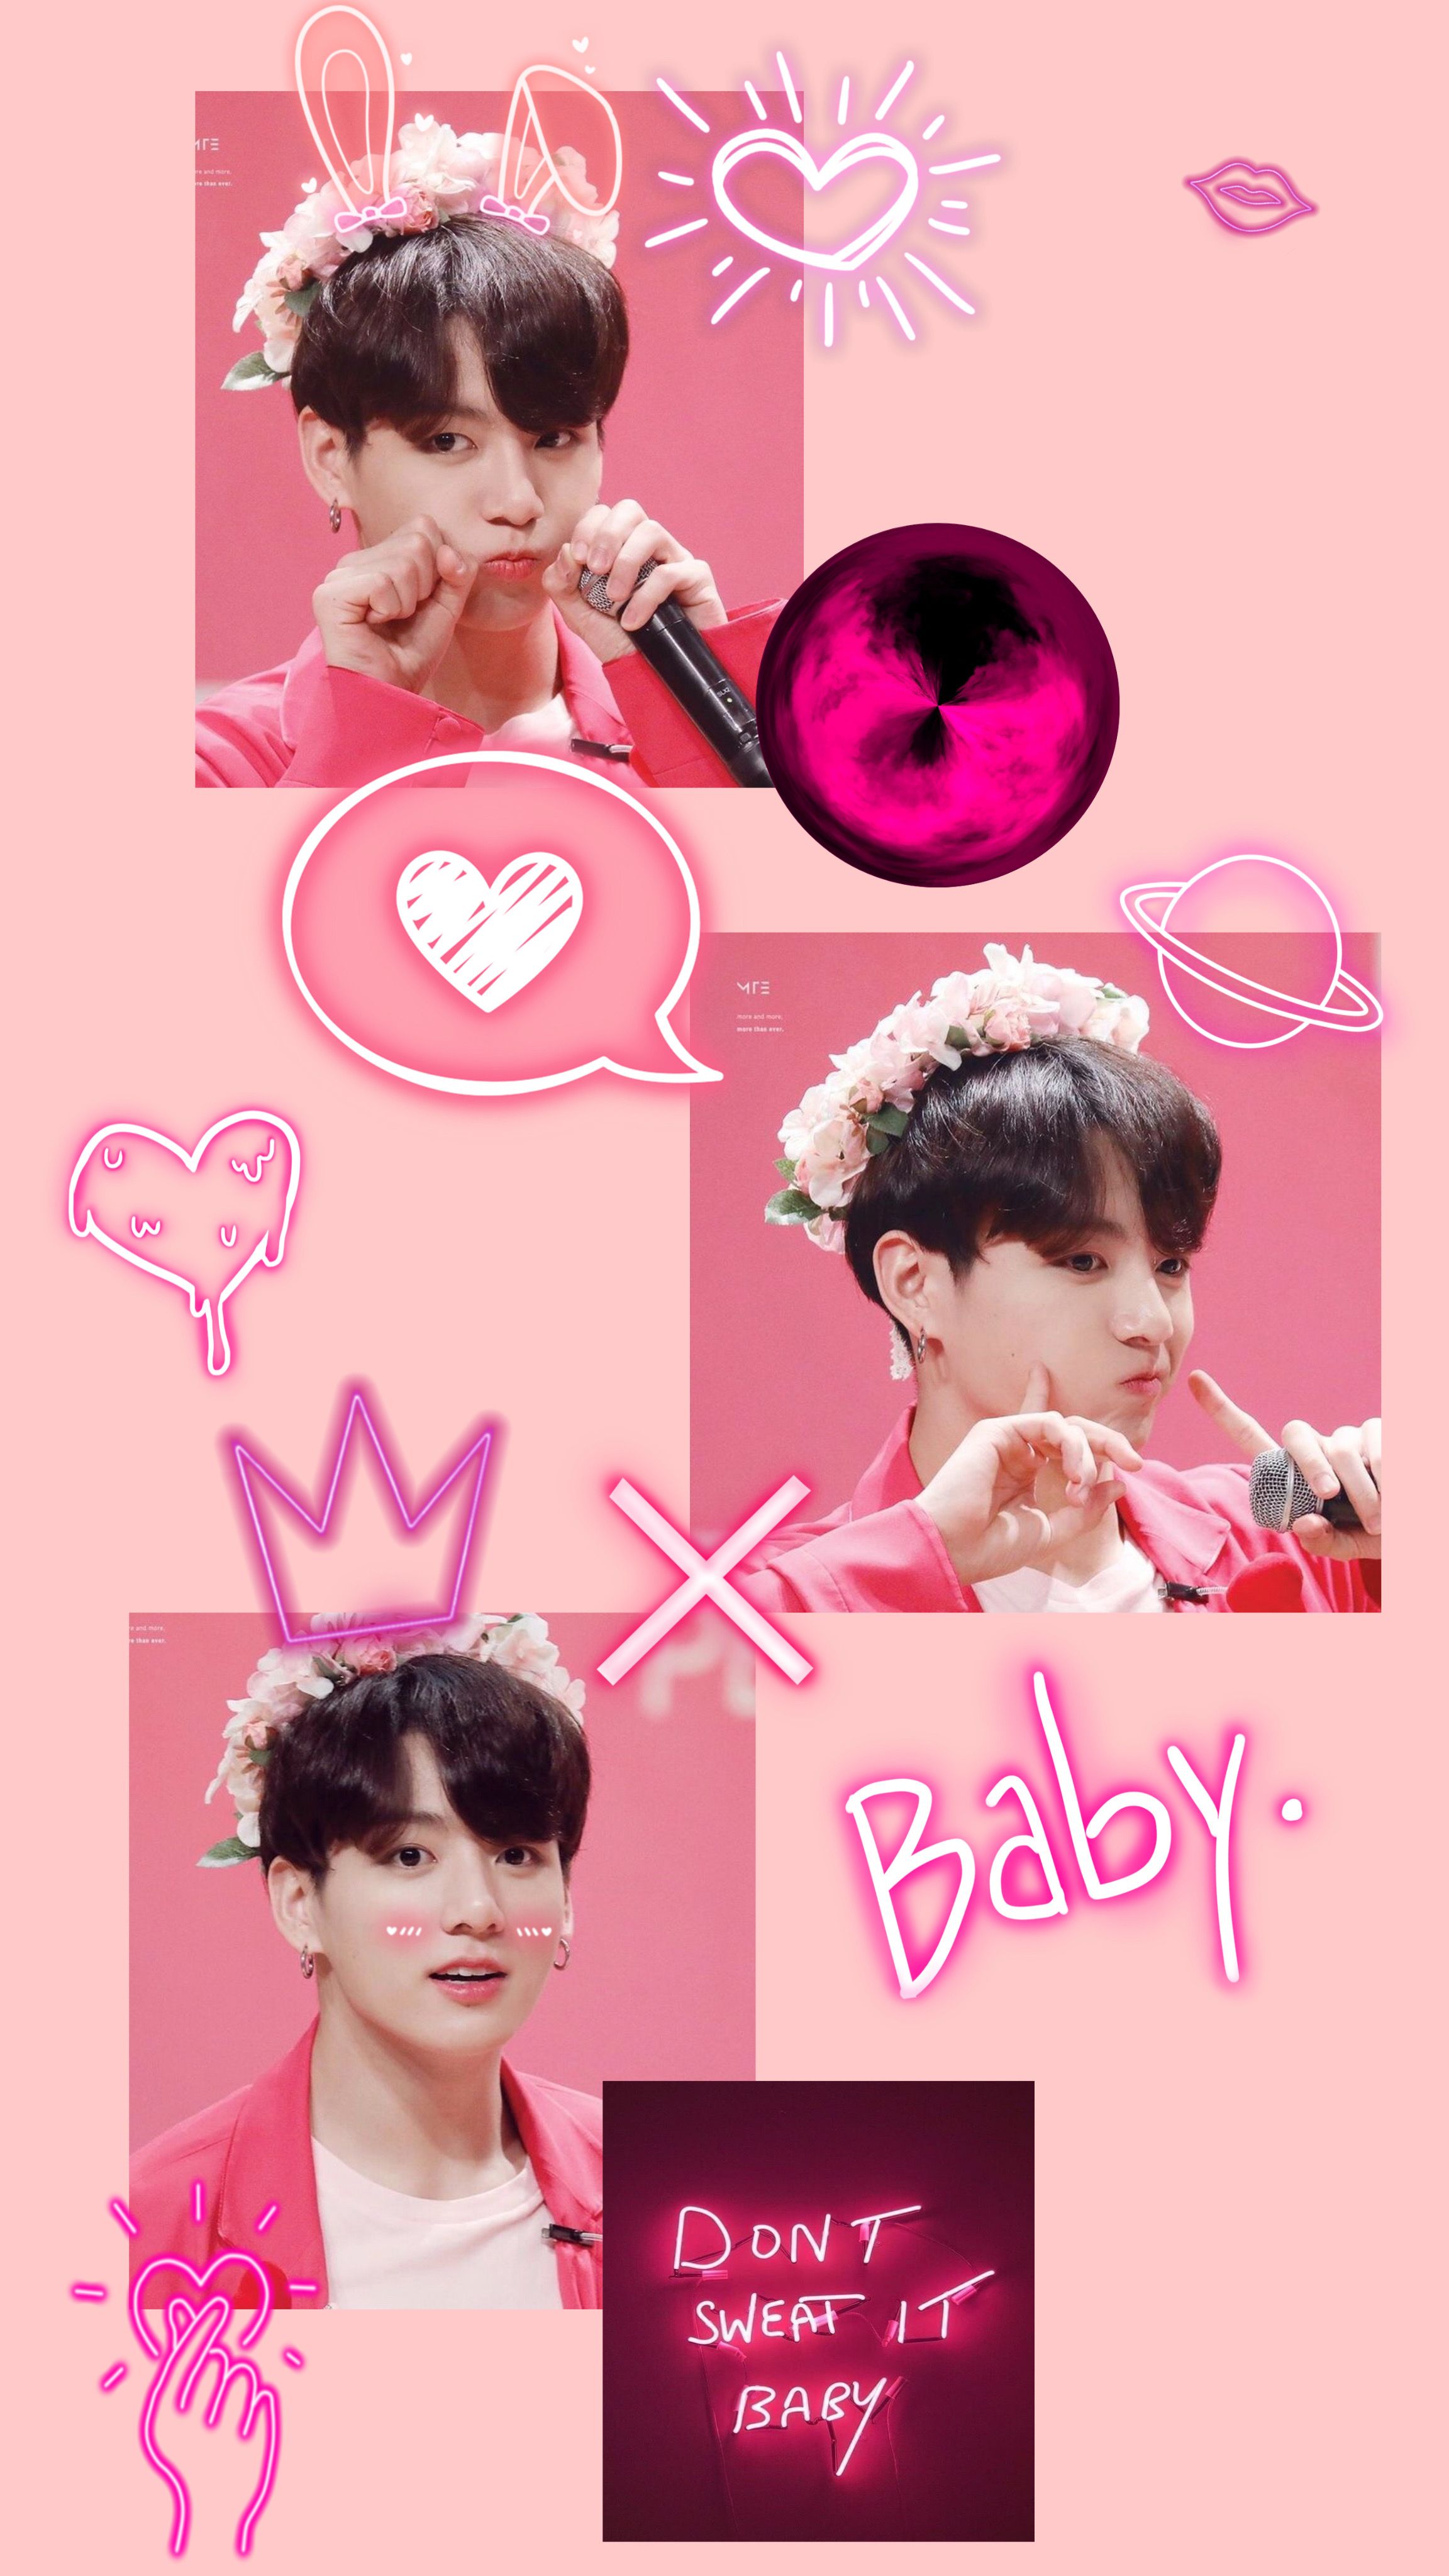 A collage of Jimin from BTS in pink and purple with a crown, heart, speech bubble, and baby - Jungkook